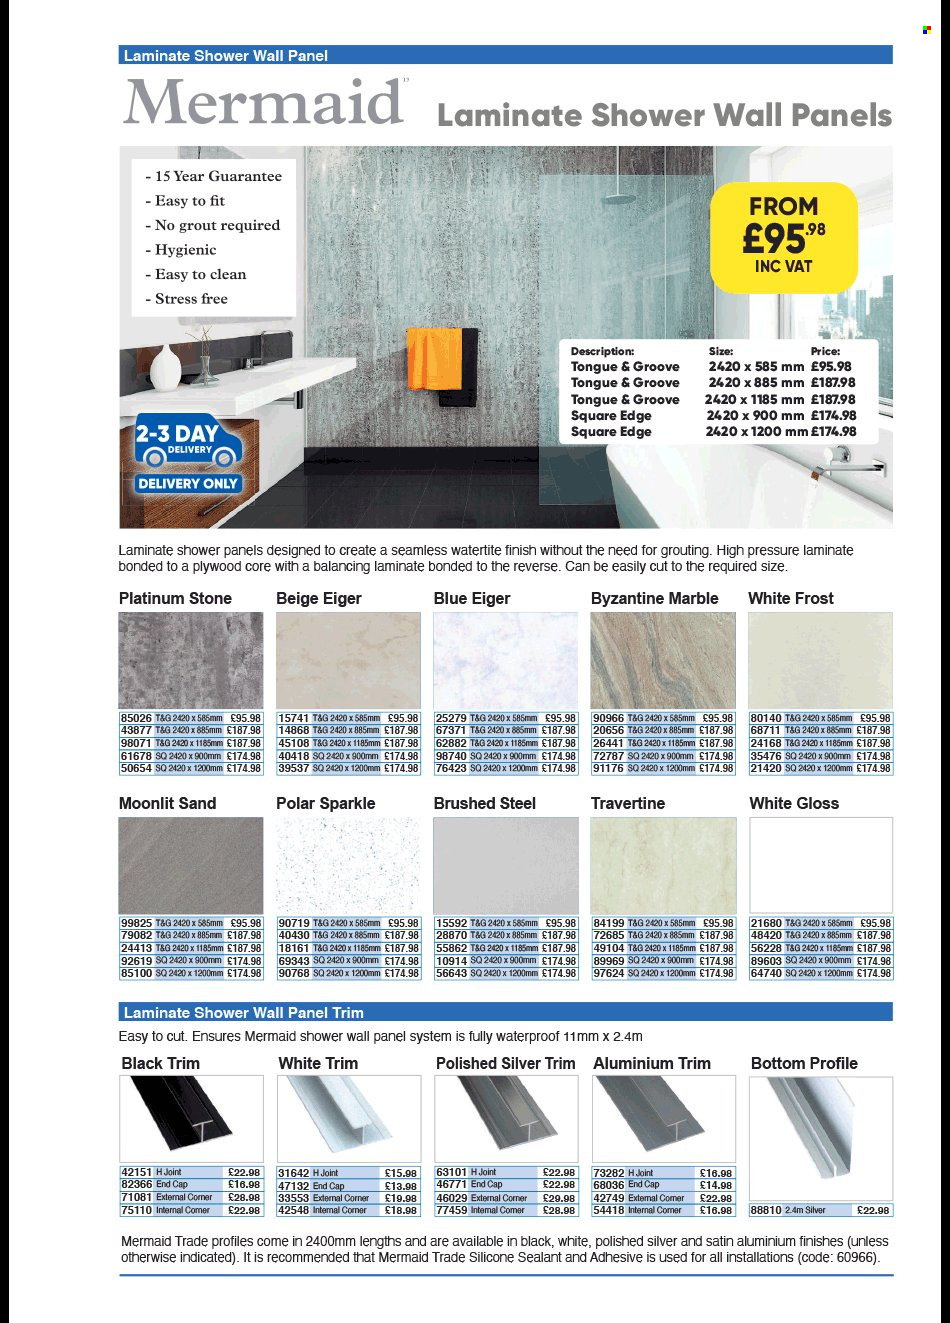 Toolstation offer . Page 236.